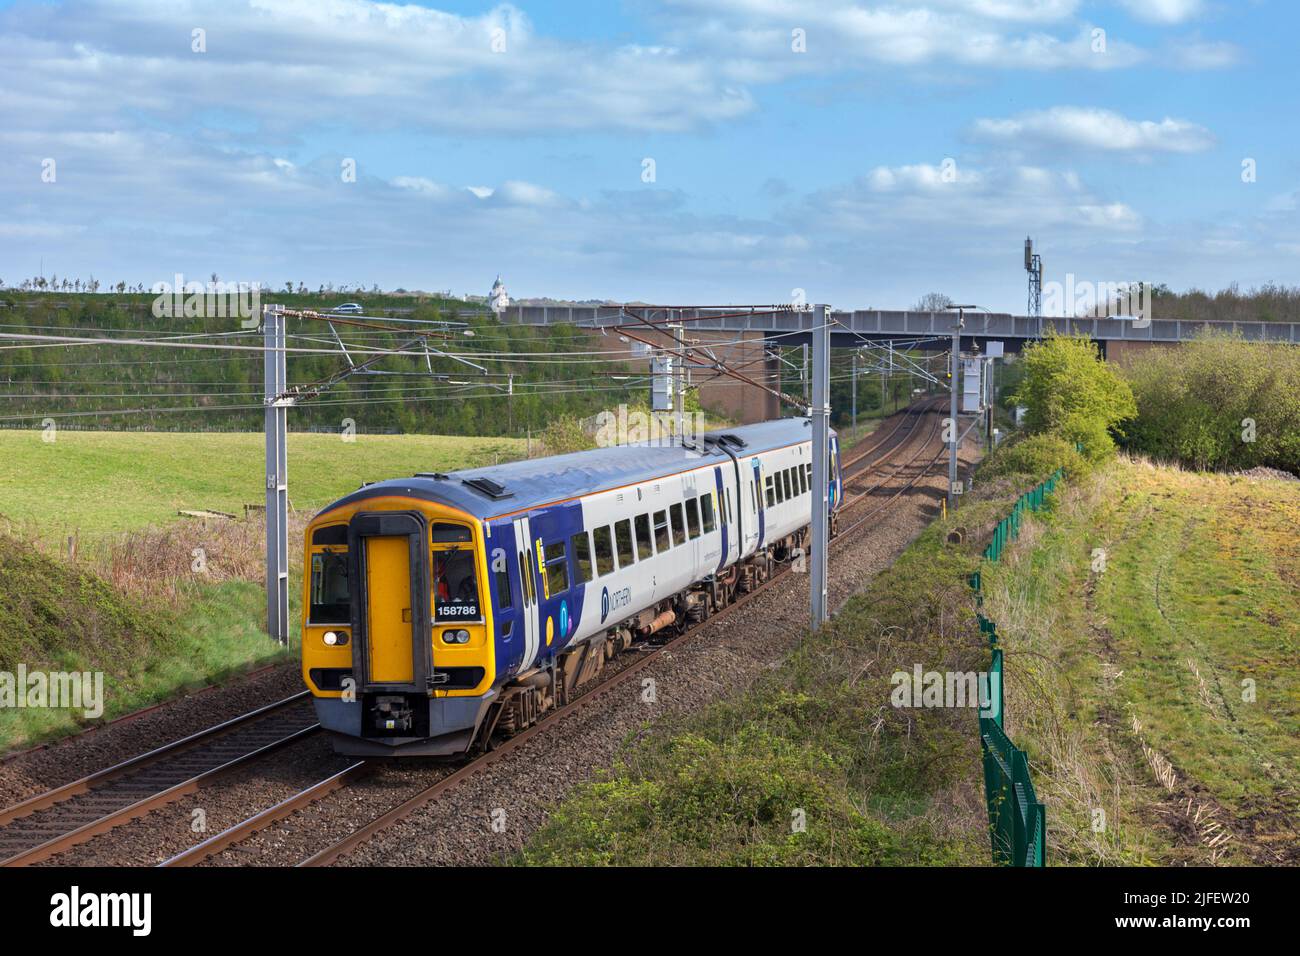 Nortehrn Rail class 158 Sprinter train 158786 Passing Morecambe South Junction on the West Coast Mainline Stockfoto